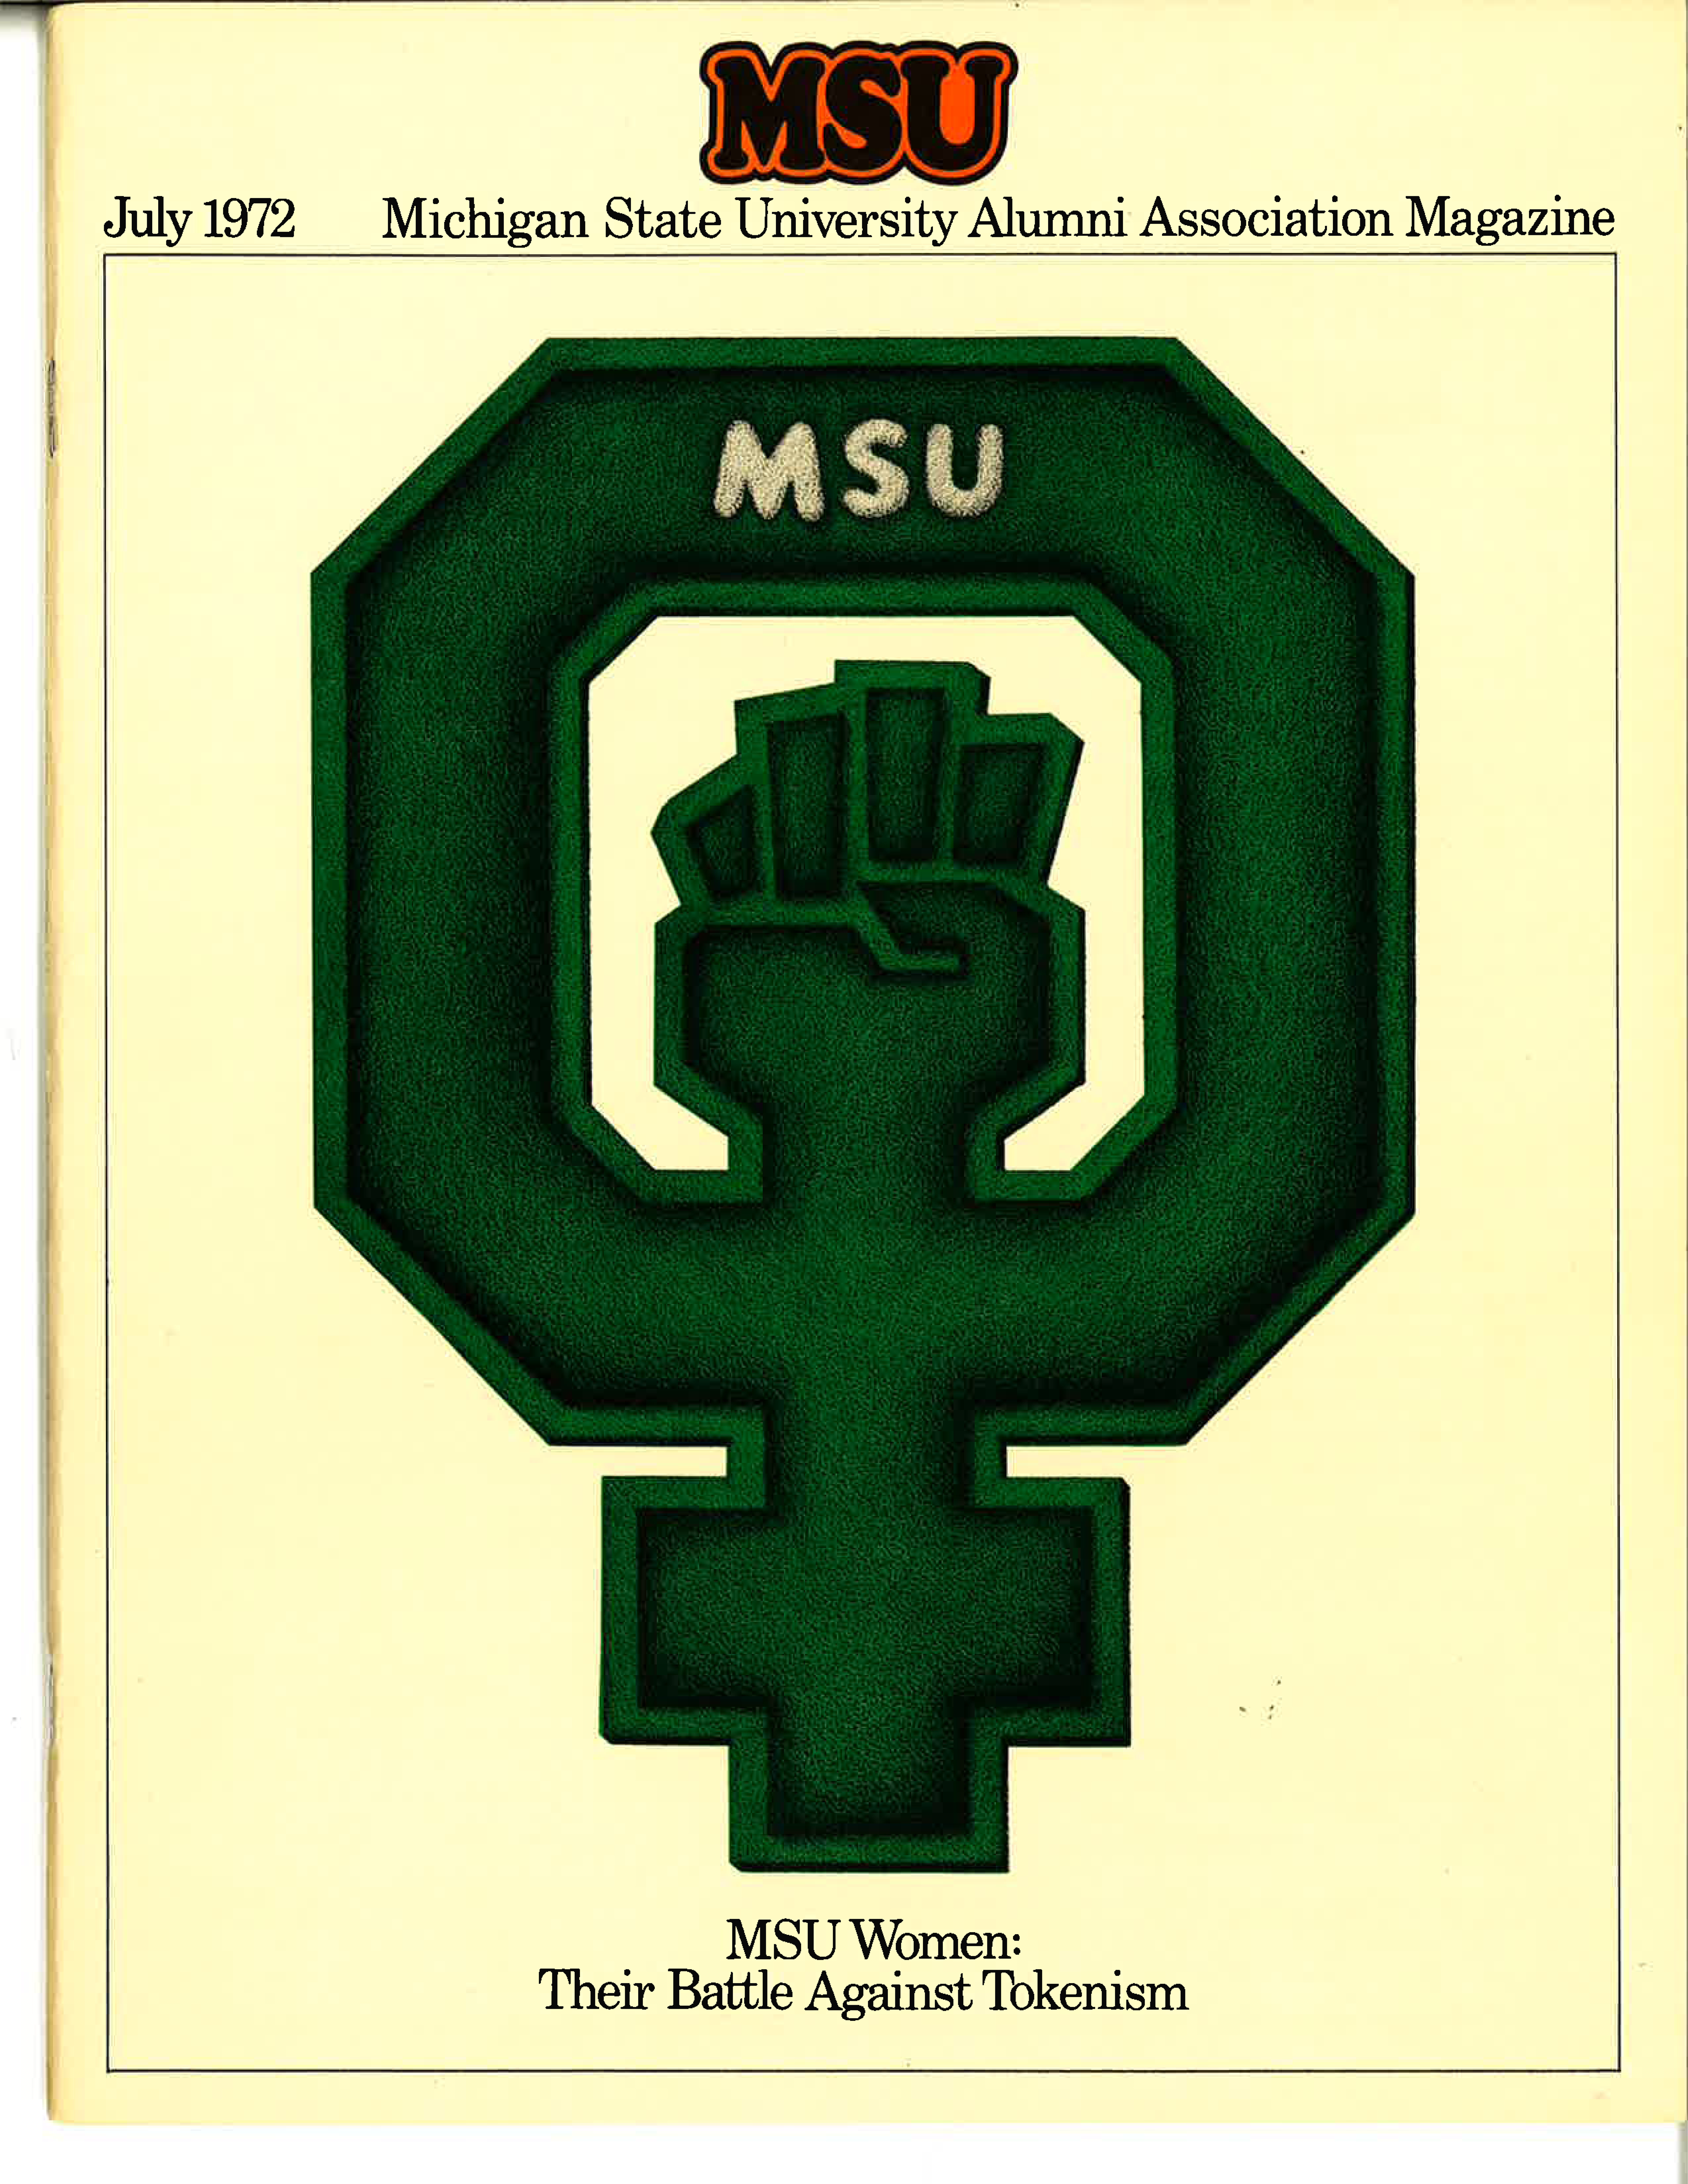 "Tokenism not tolerated here" article from MSU Alumni Magazine, July 1972